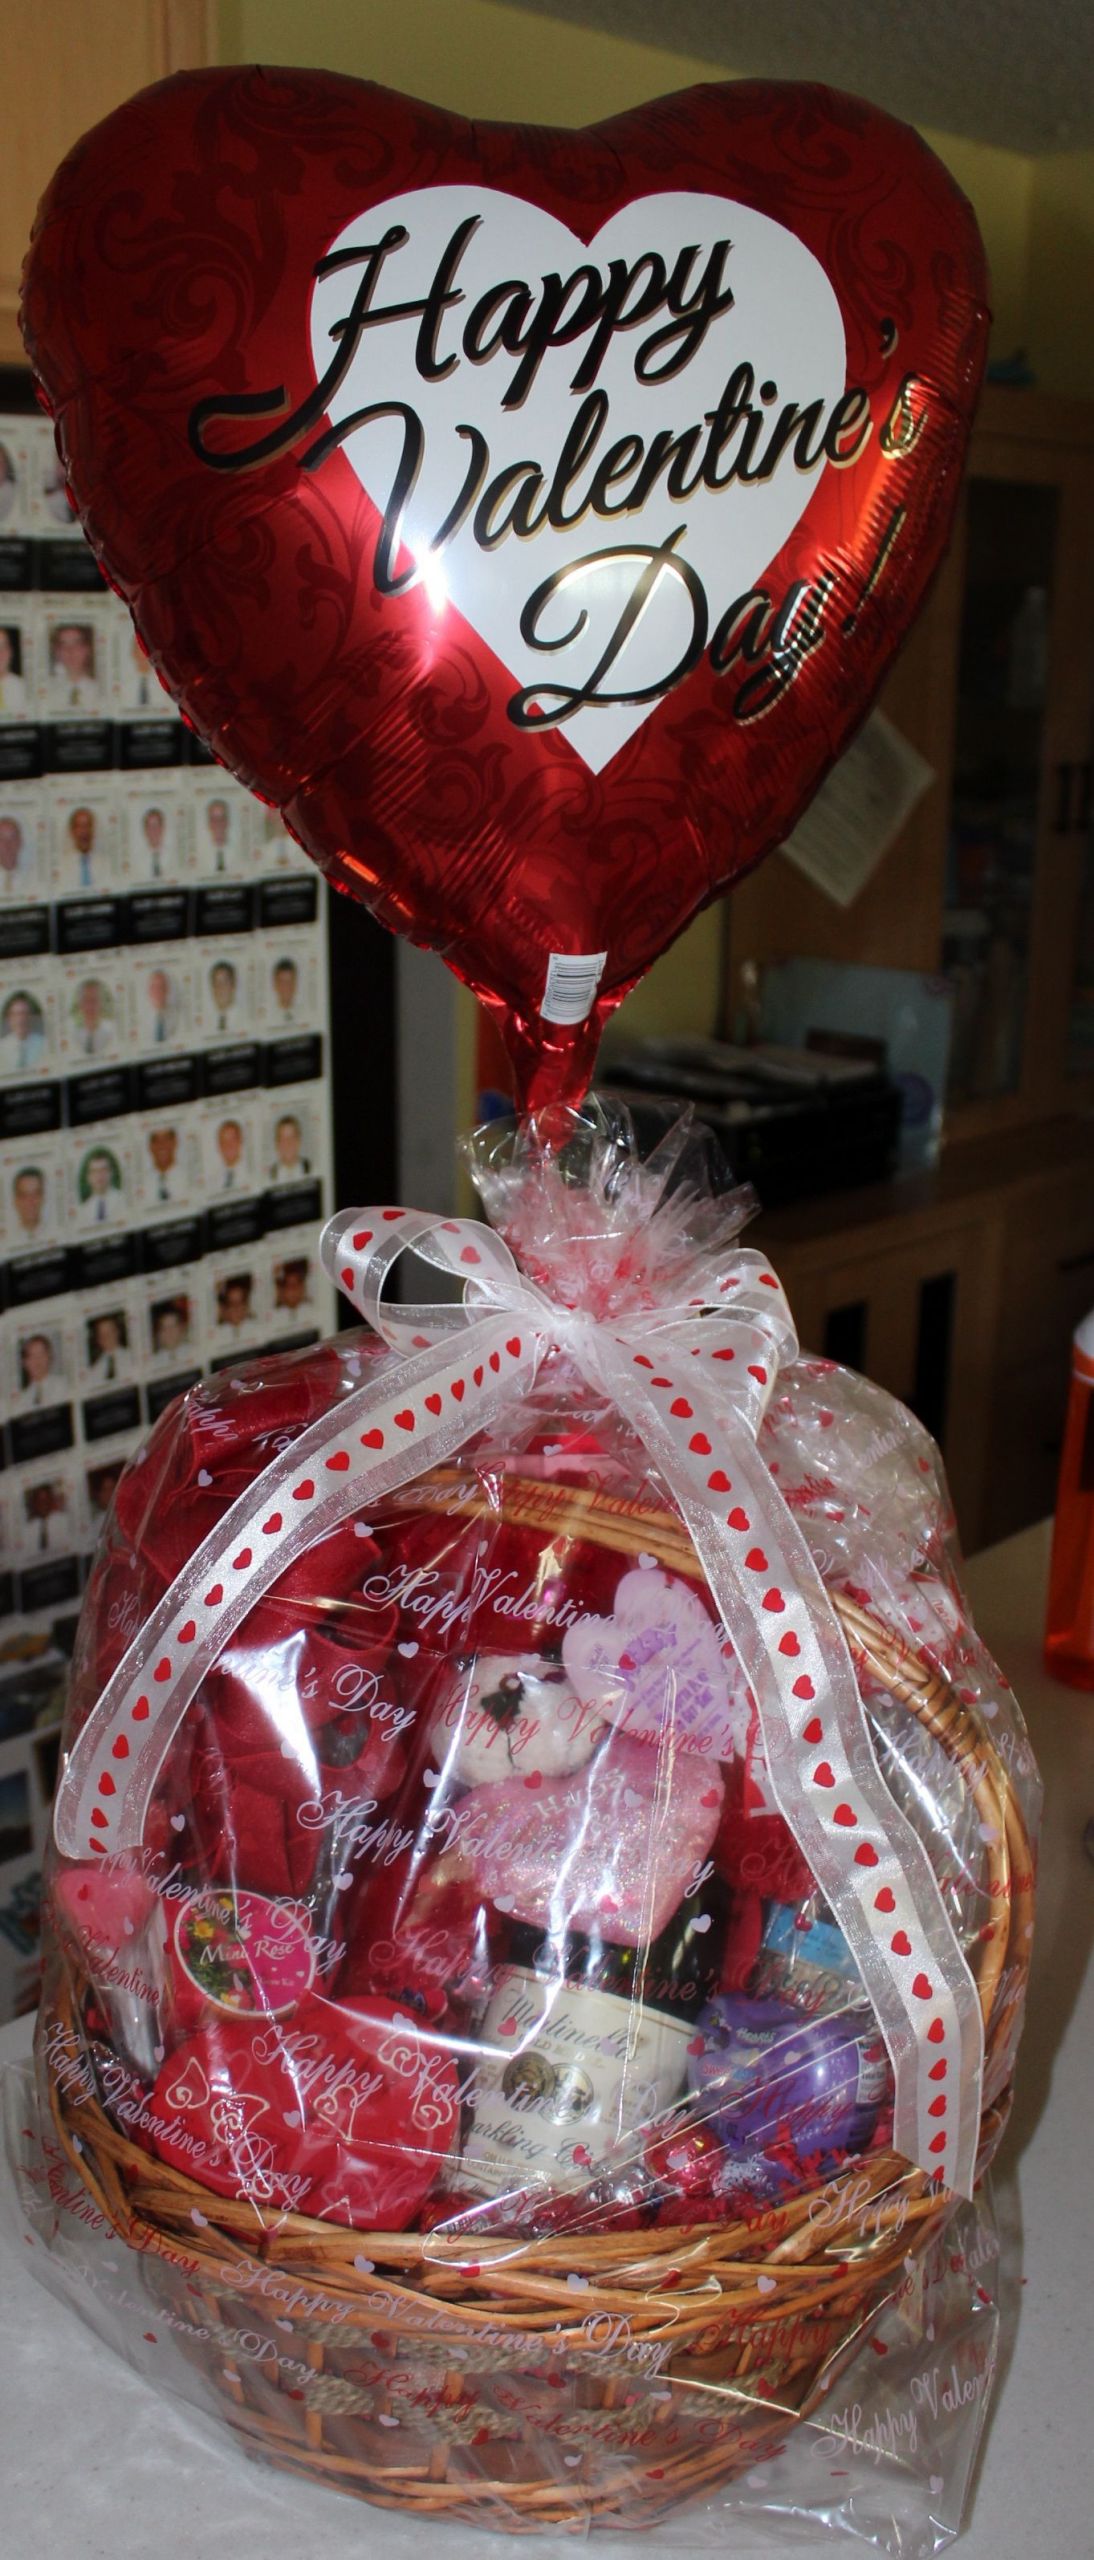 Best Valentine Gift Ideas For Her
 47 How To Make A Valentine Gift Basket For Her Best Idea